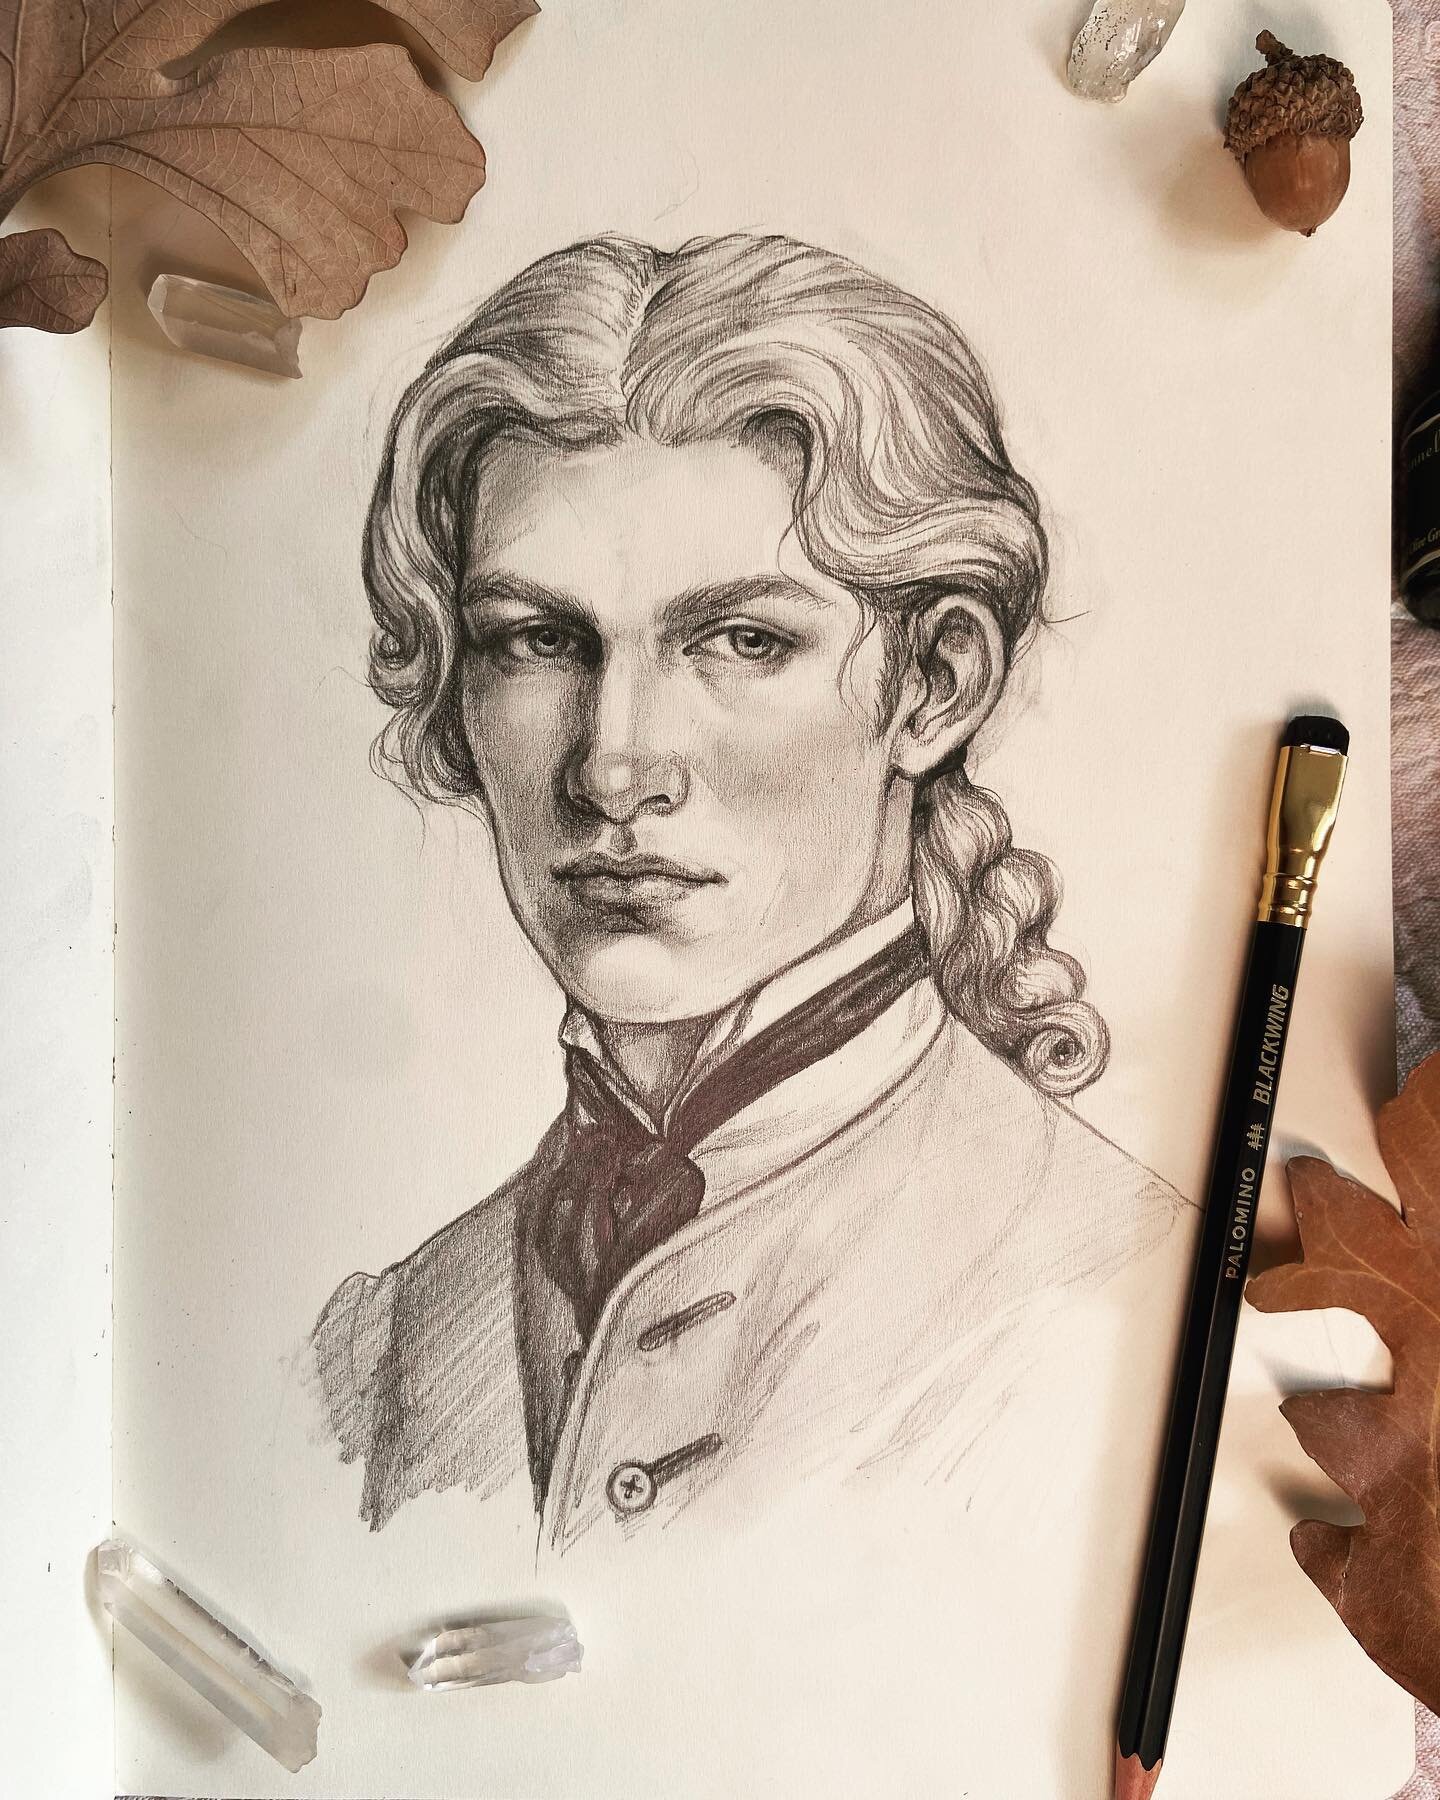 Just another sketchbook page, as I haven&rsquo;t had any of my larger pieces working lately. ☕️📖I was going for 18th century vibes but this ended up more &ldquo;e-boy founding father&rdquo; unfortunately 🫠
.
.
.
.
#sketchbooktour #blackwingpencil #